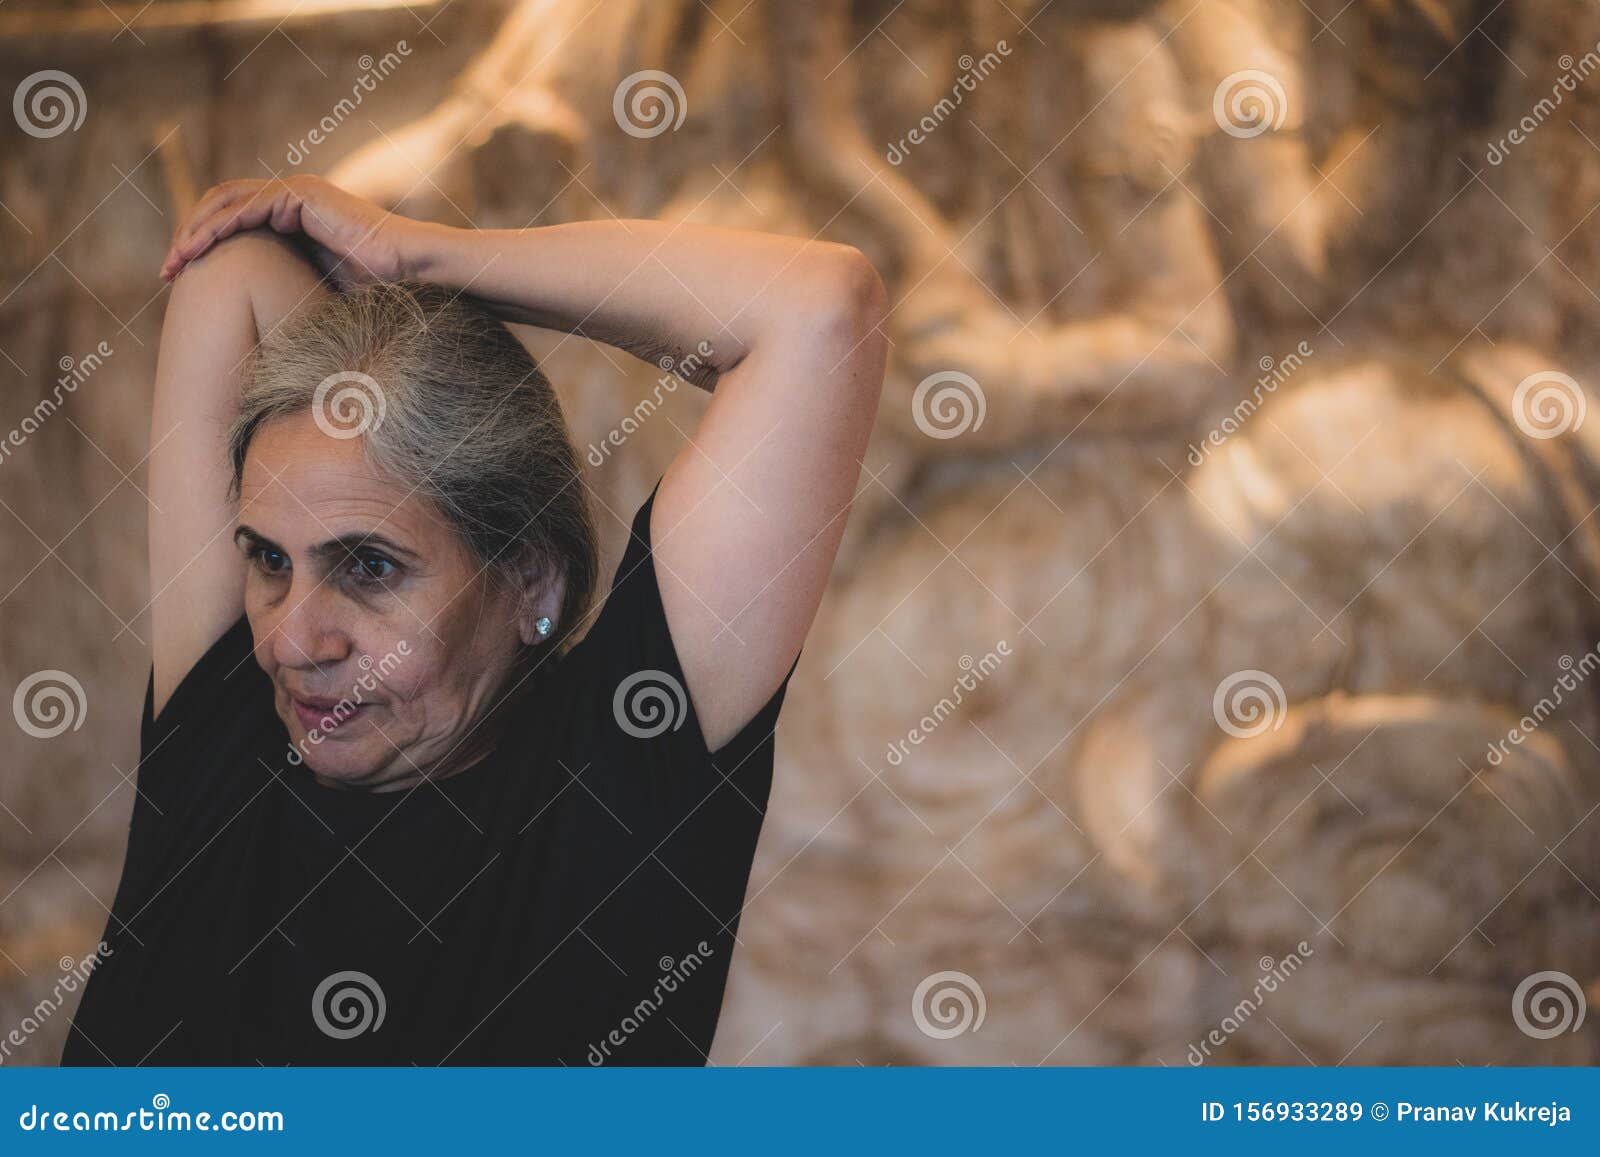 Senior Indian Woman with Grey Hair and Glowing Skin, Meditating in the  Morning. Stock Image - Image of adventure, lady: 156933289